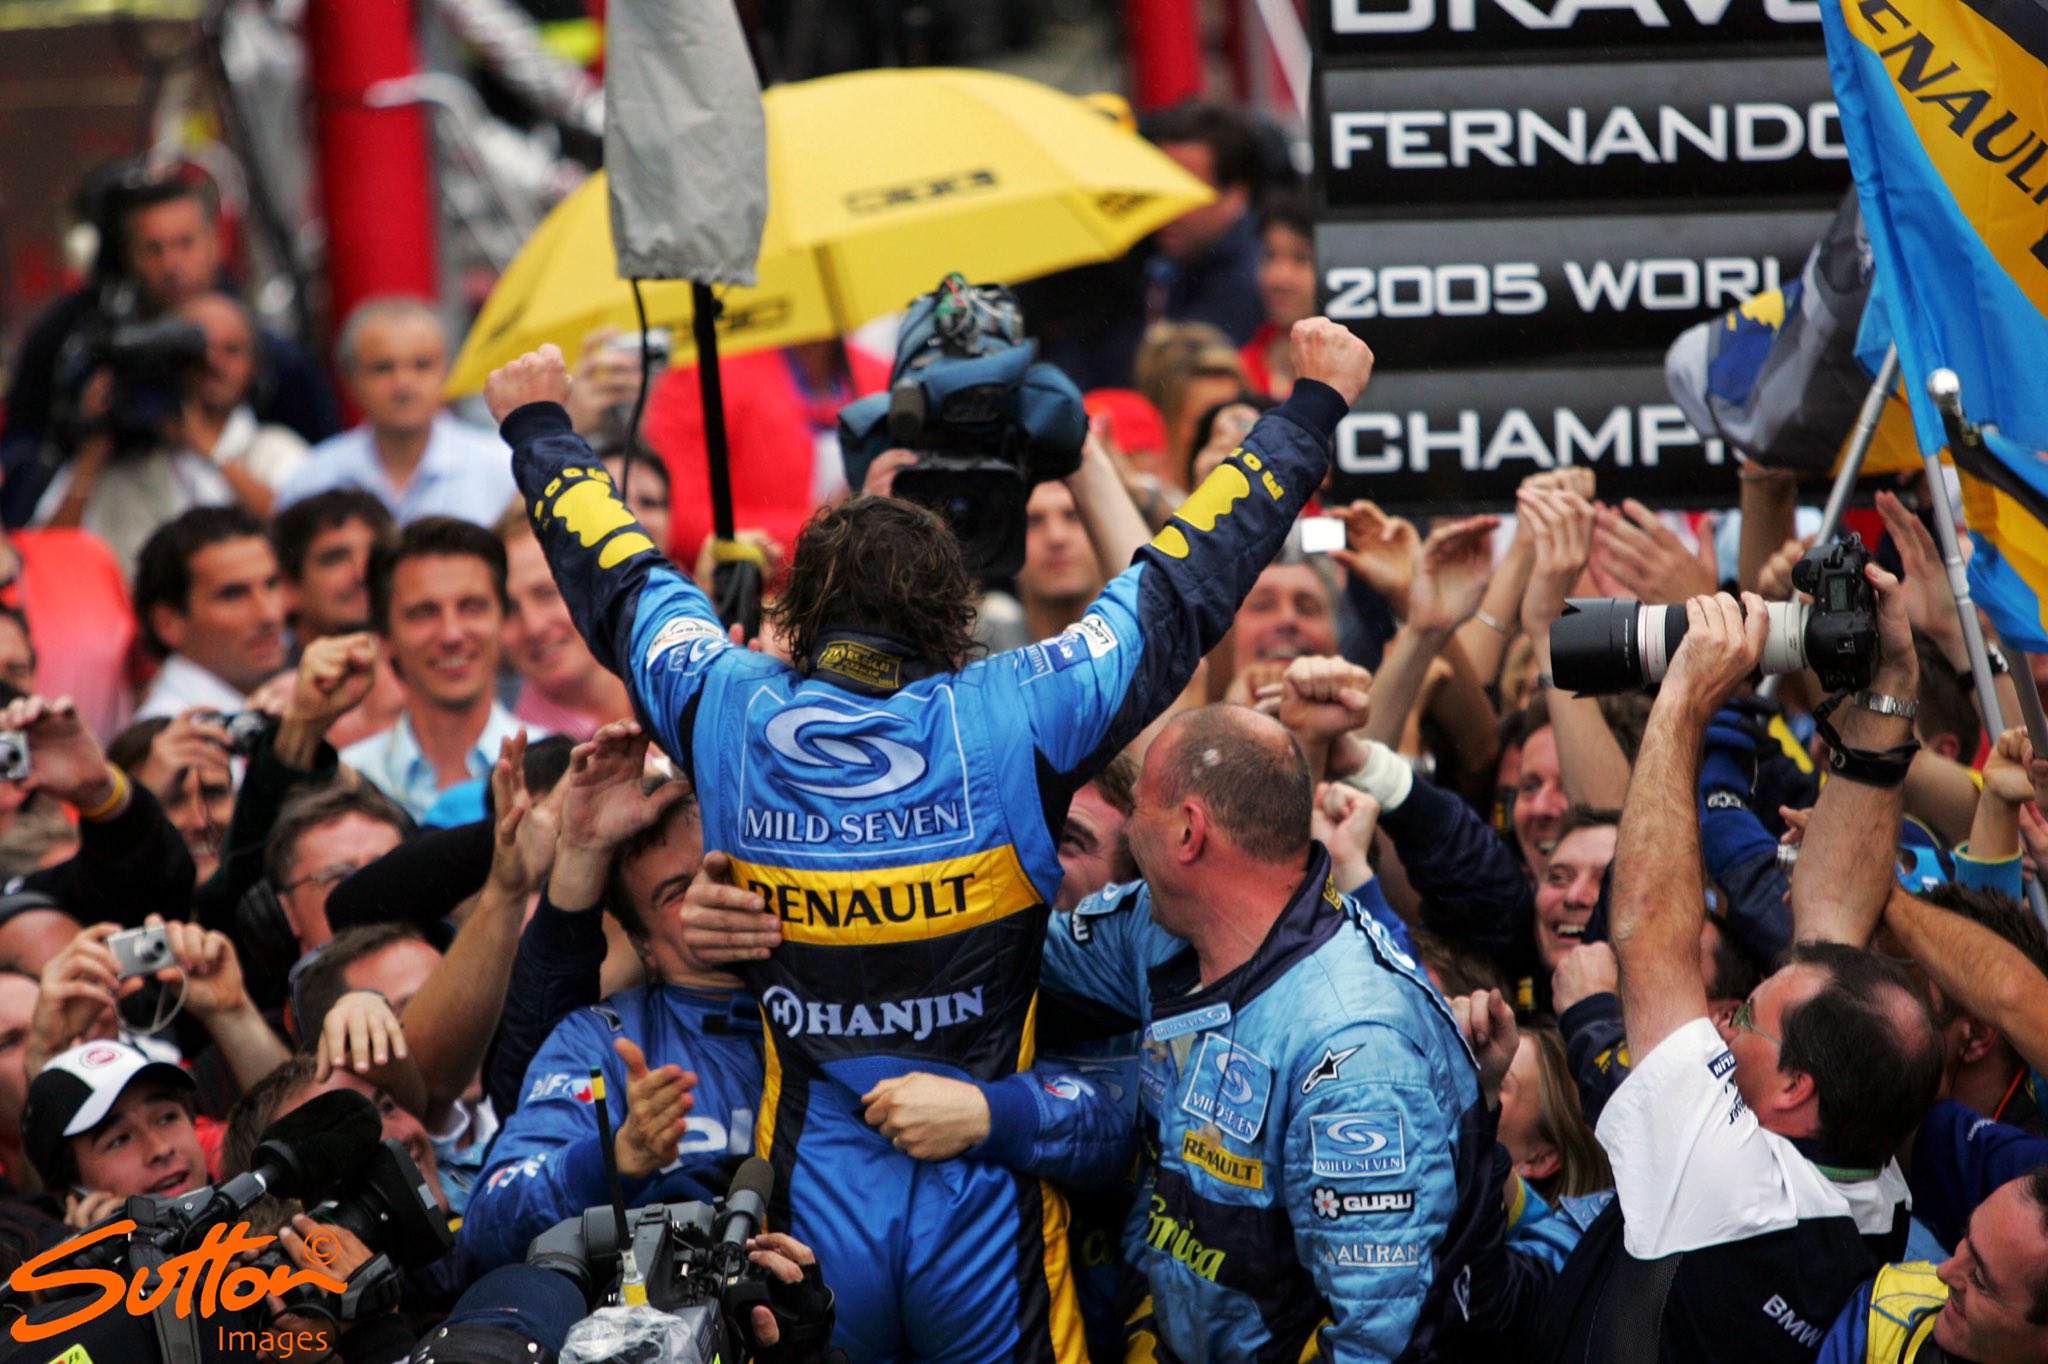 bund midler Saucer Motorsport Images on Twitter: "#OnThisDayInF1 Fernando Alonso won the 2005 World  Championship for Renault, becoming the youngest Formula 1 World Champion at  the age of 24 https://t.co/K8V8fyn8iw" / Twitter